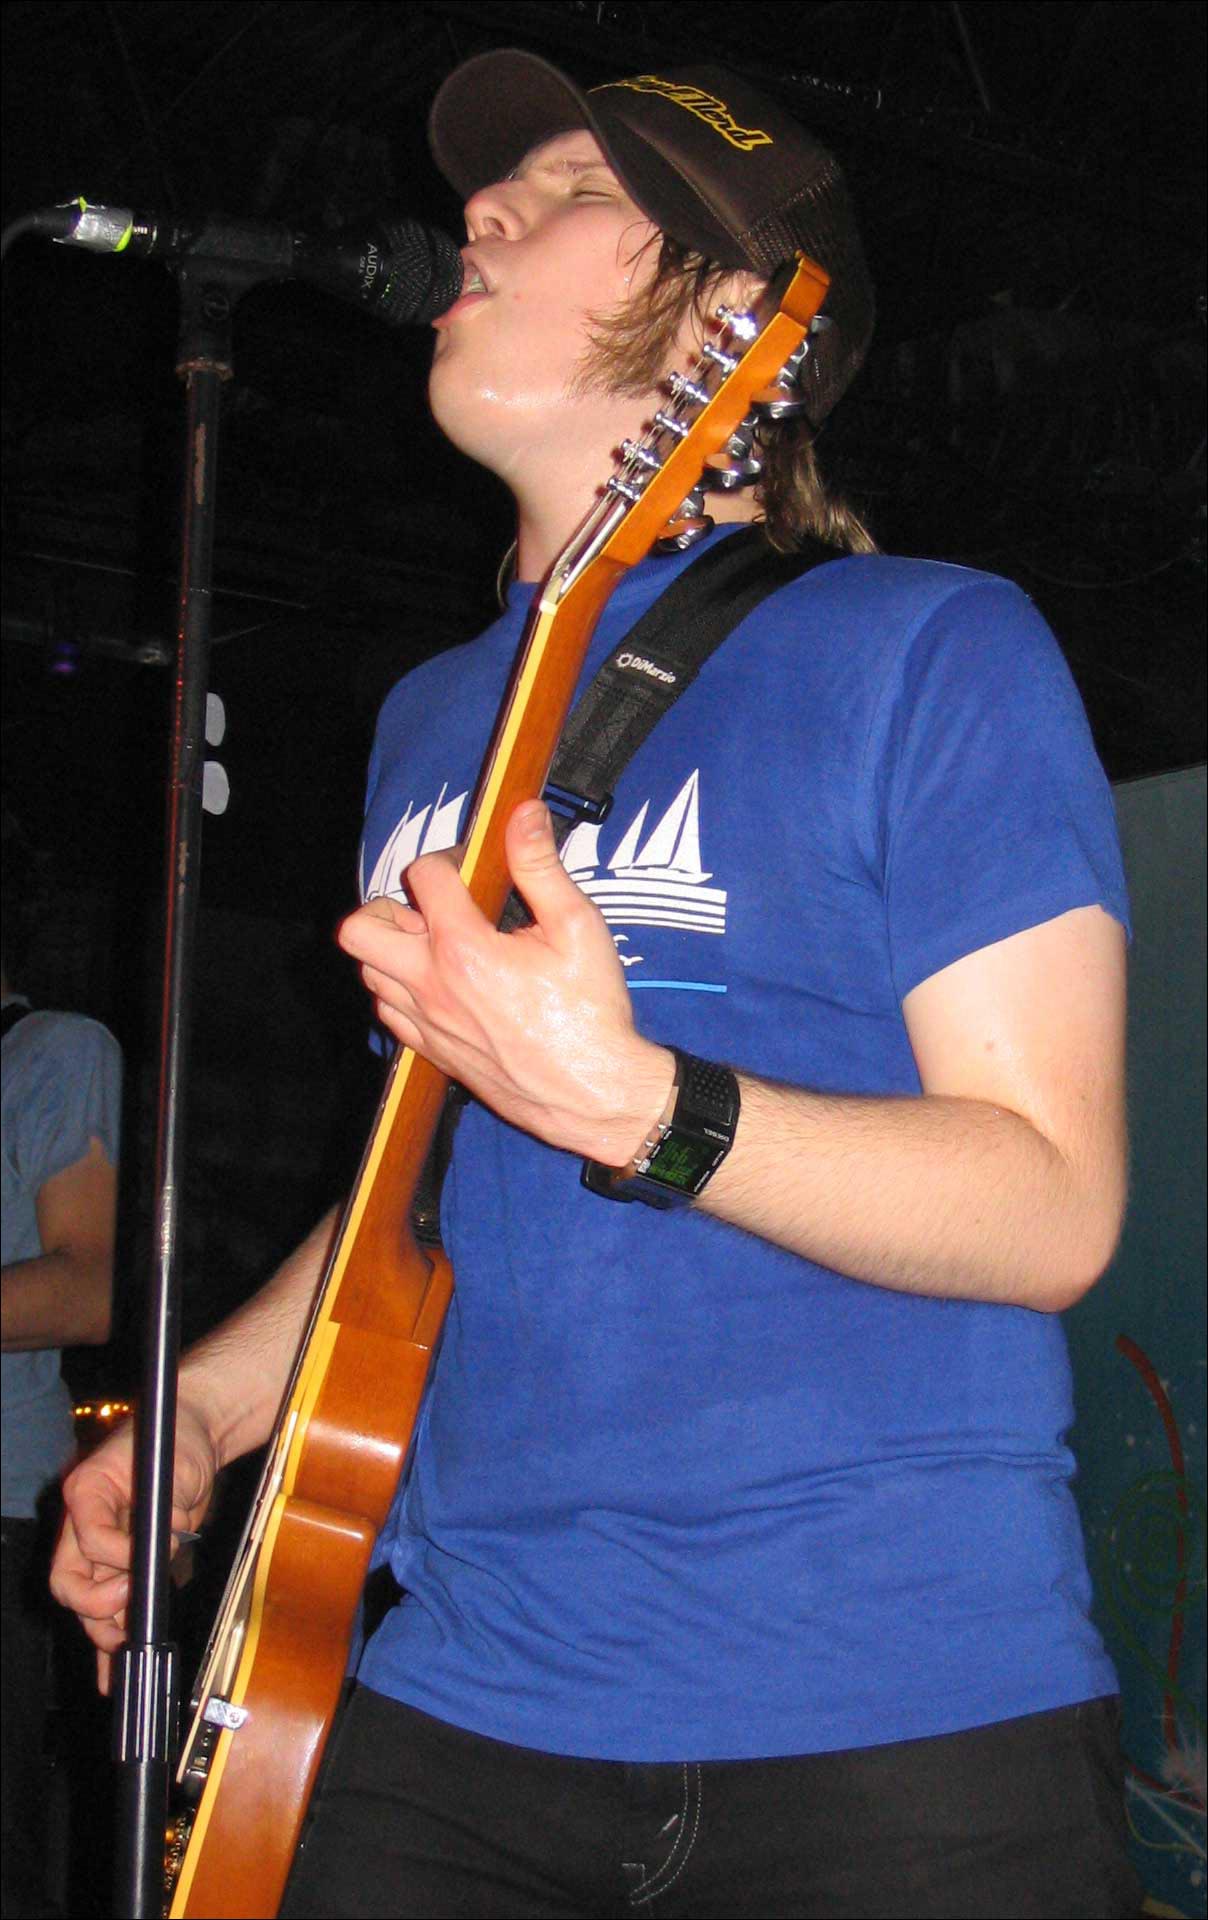 Fall Out Boy at The Factory in Fort Lauderdale on April 15, 2005